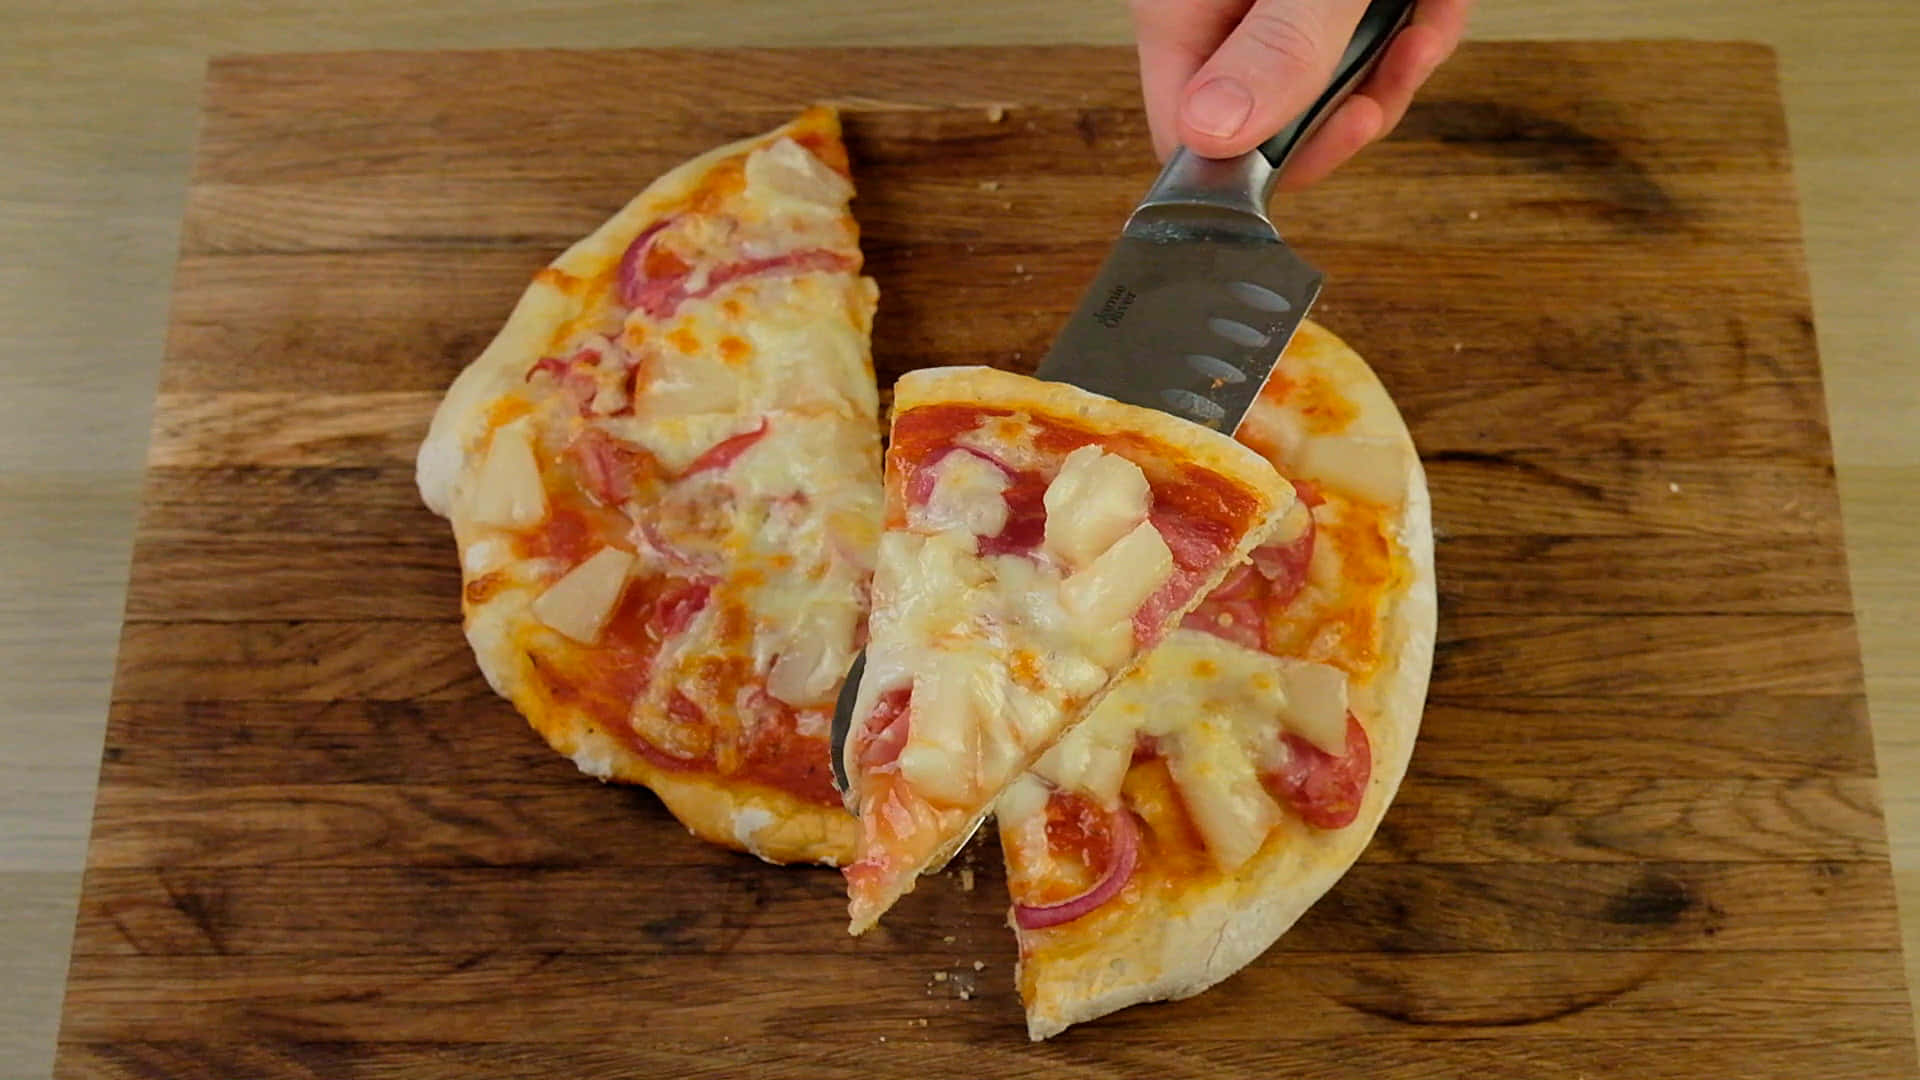 Bite into a crusty, cheesy and flavorful slice of pizza